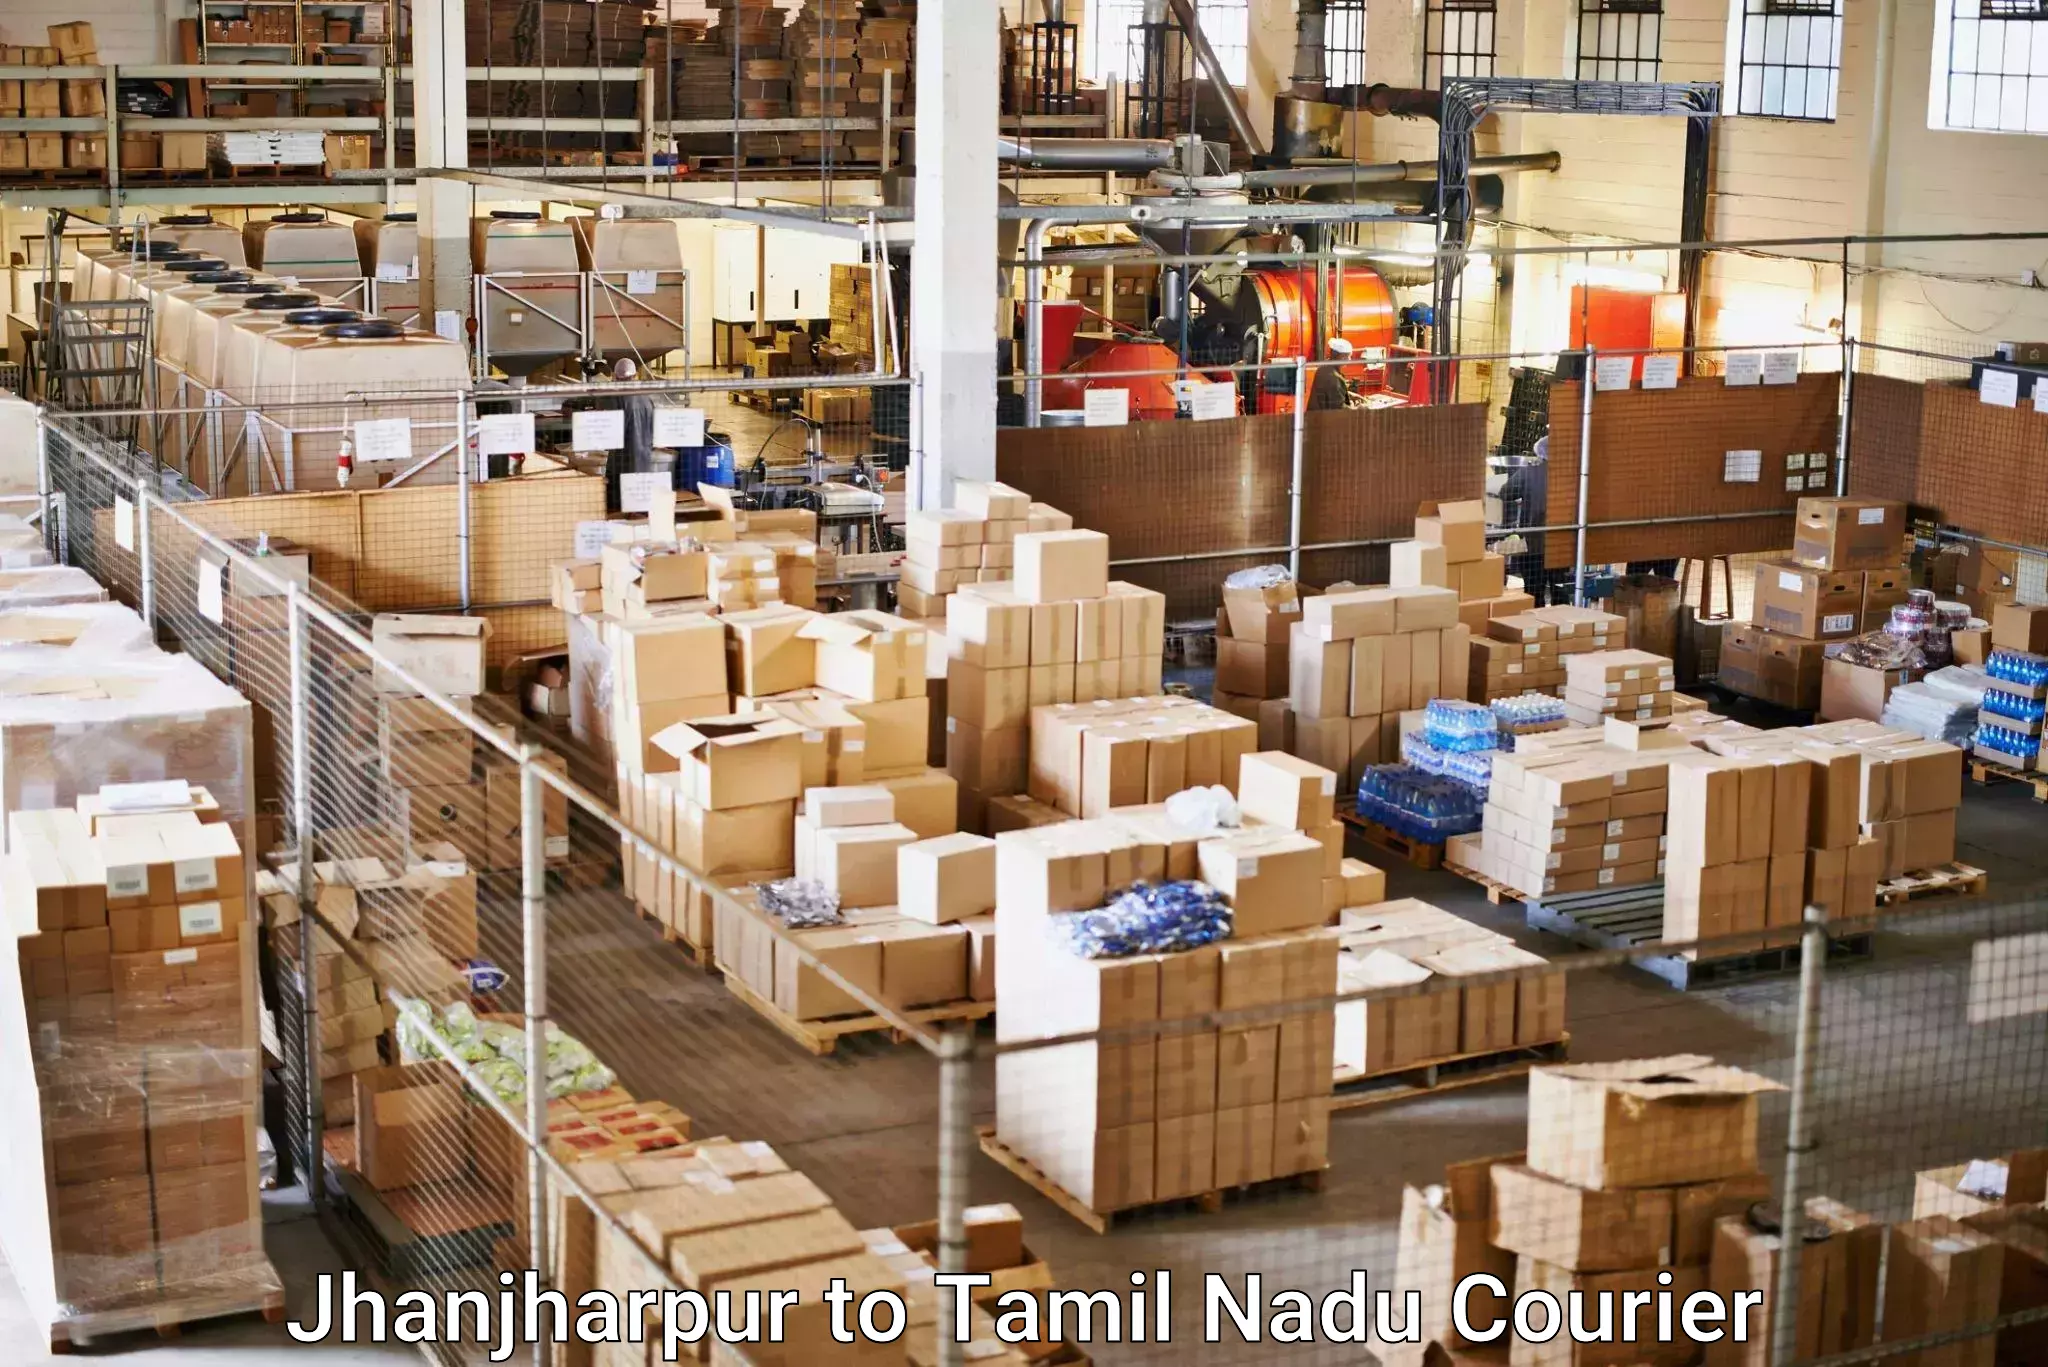 State-of-the-art courier technology Jhanjharpur to Sivaganga